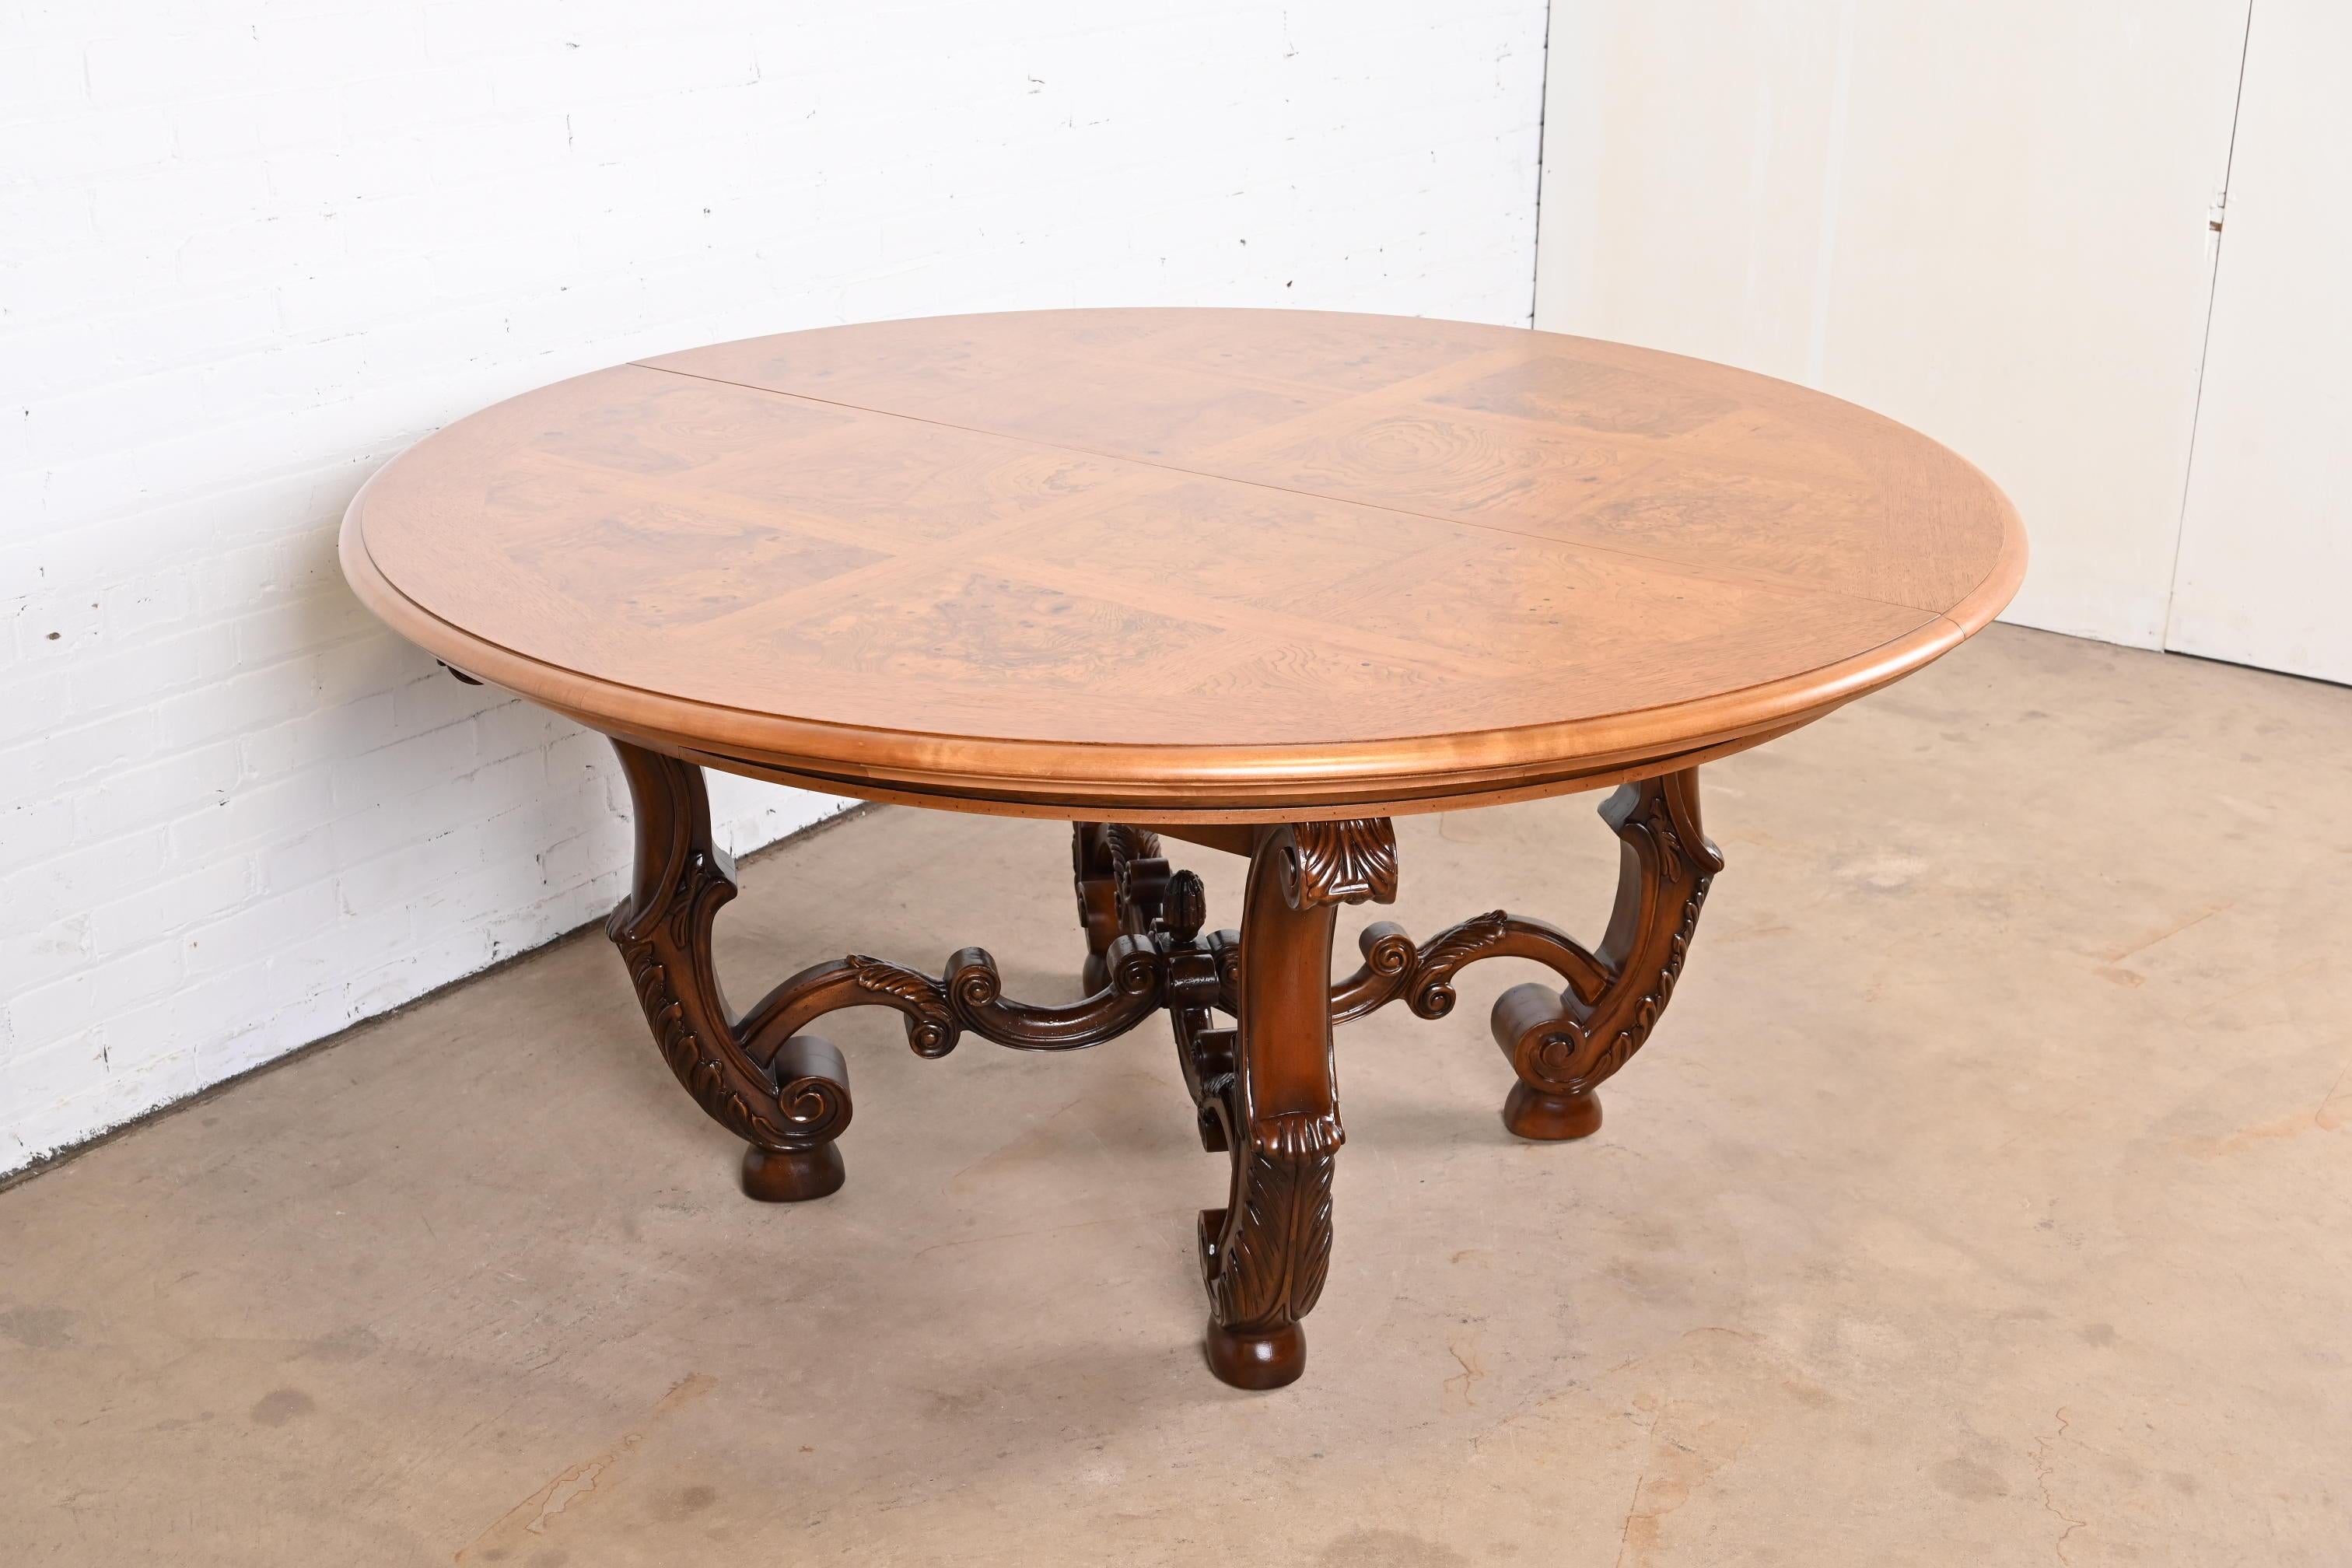 Henredon Italian Provincial Carved Walnut and Burl Wood Pedestal Dining Table For Sale 8